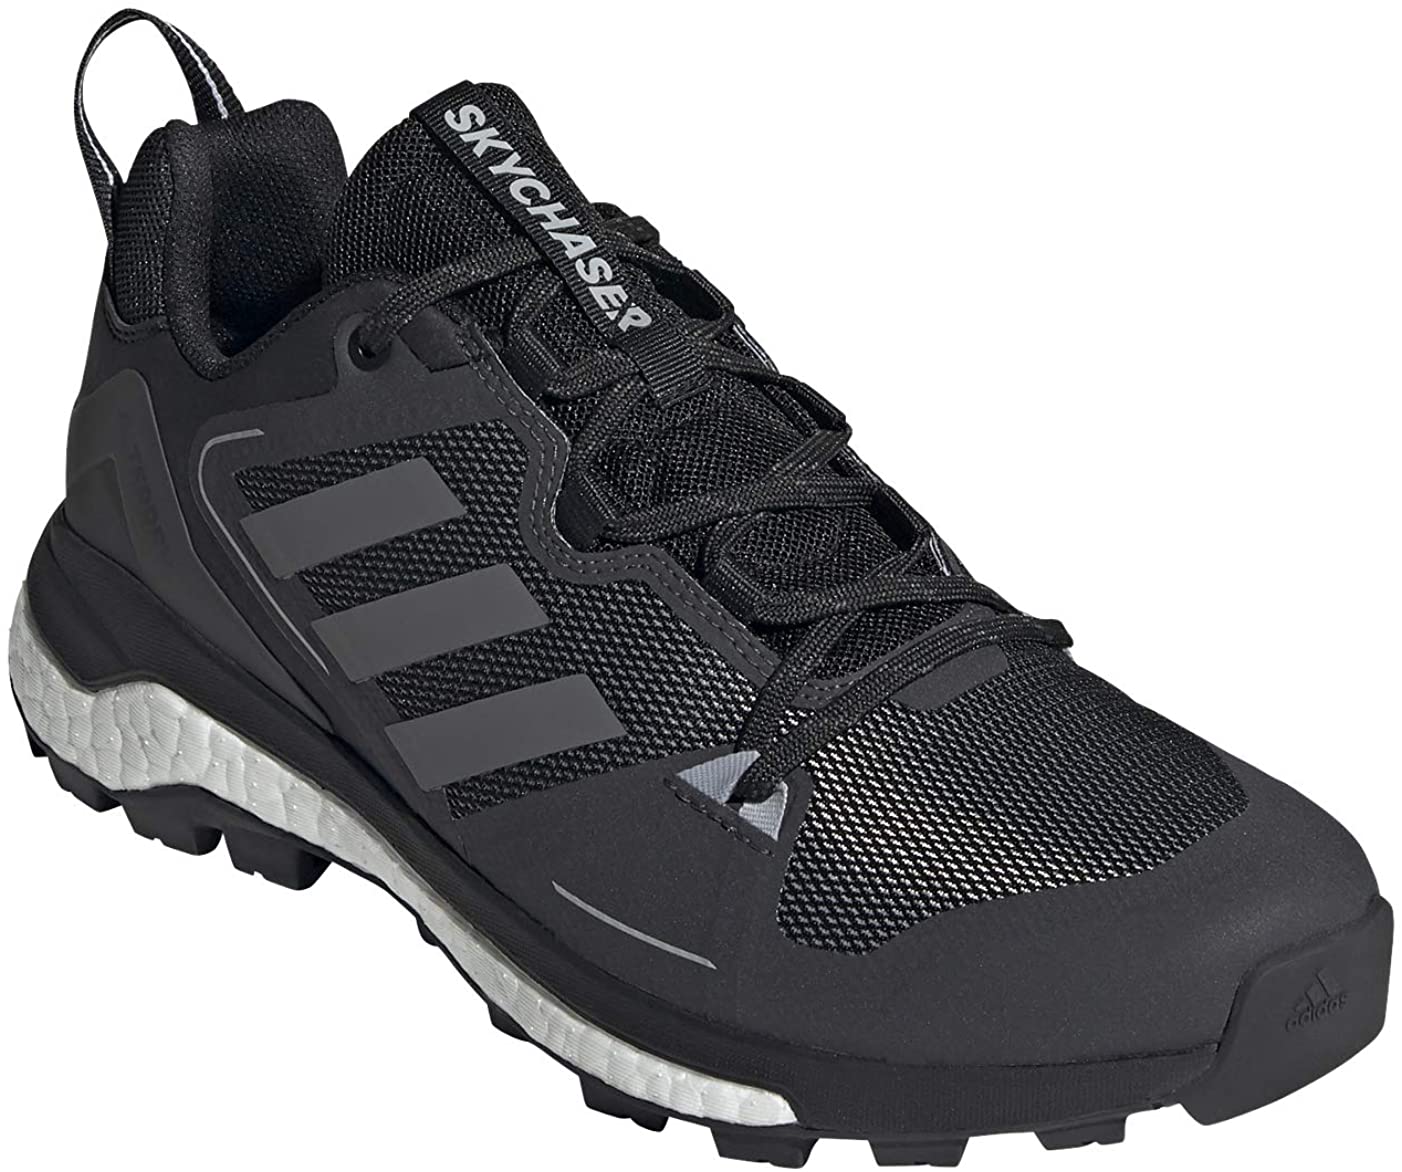 Men's adidas Terrex Skychaser 2.0 Hiking Shoe Core Black/Grey Four/Dgh Solid Grey from the front